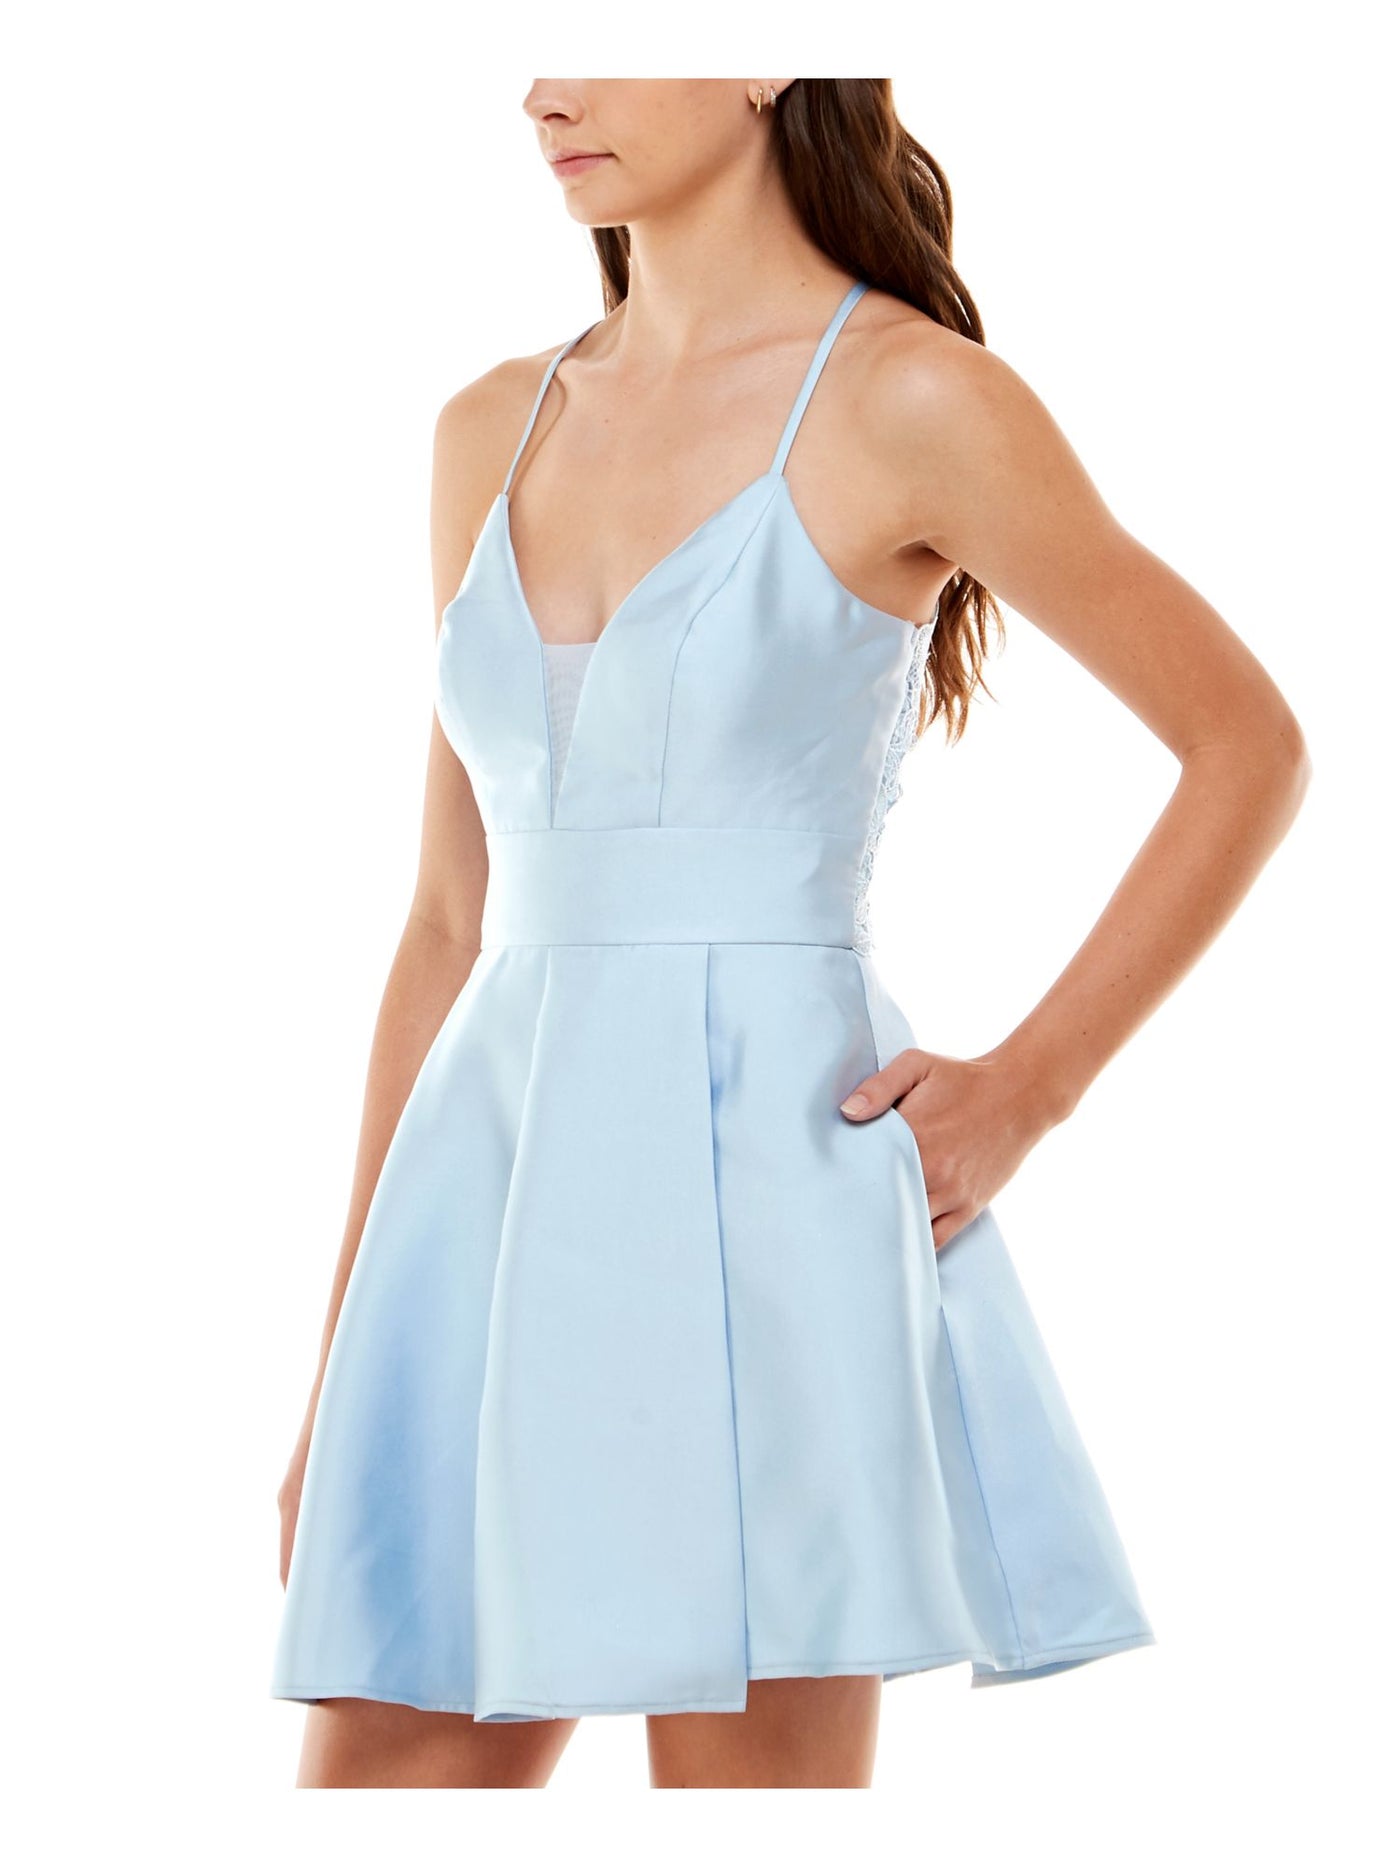 SPEECHLESS Womens Light Blue Pocketed Zippered Cut Out Lace Back Pleated Spaghetti Strap V Neck Short Party Fit + Flare Dress Juniors 11